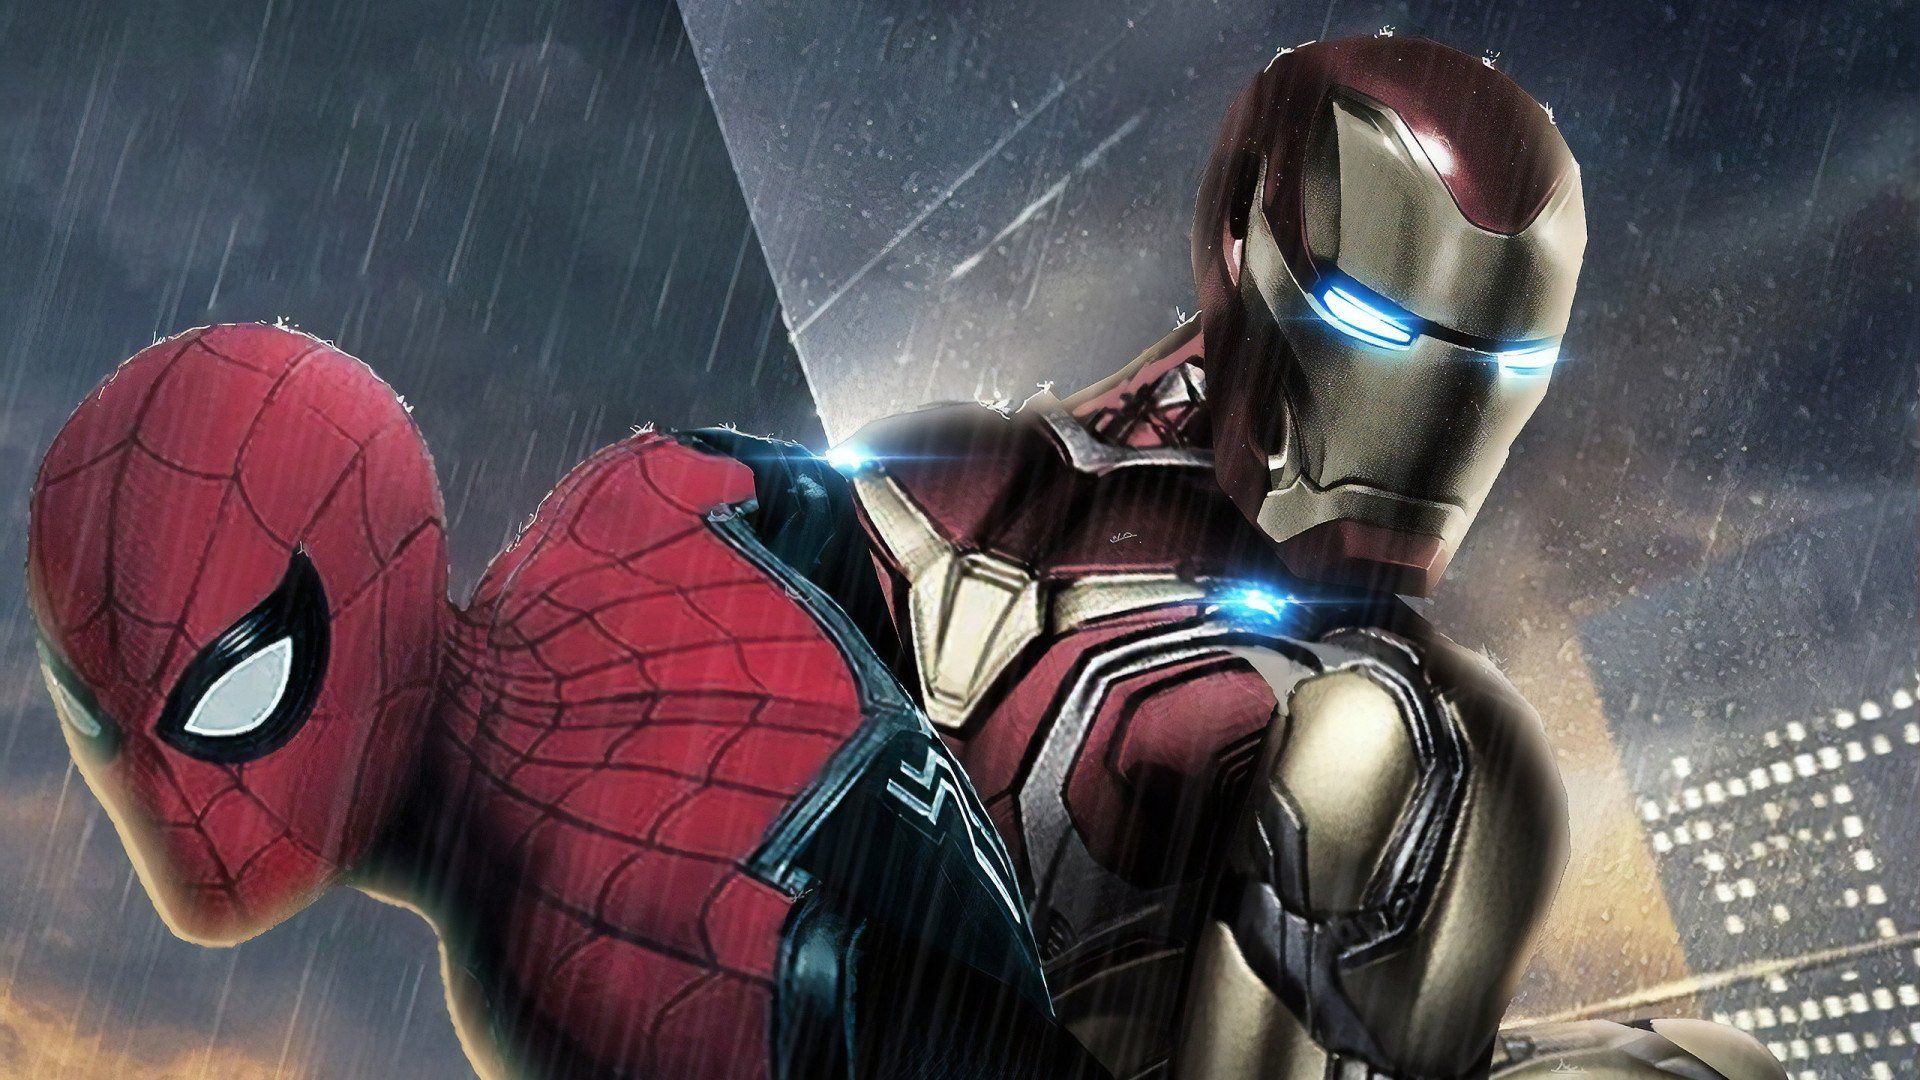 Iron Man With Spider Man Wallpapers - Wallpaper Cave